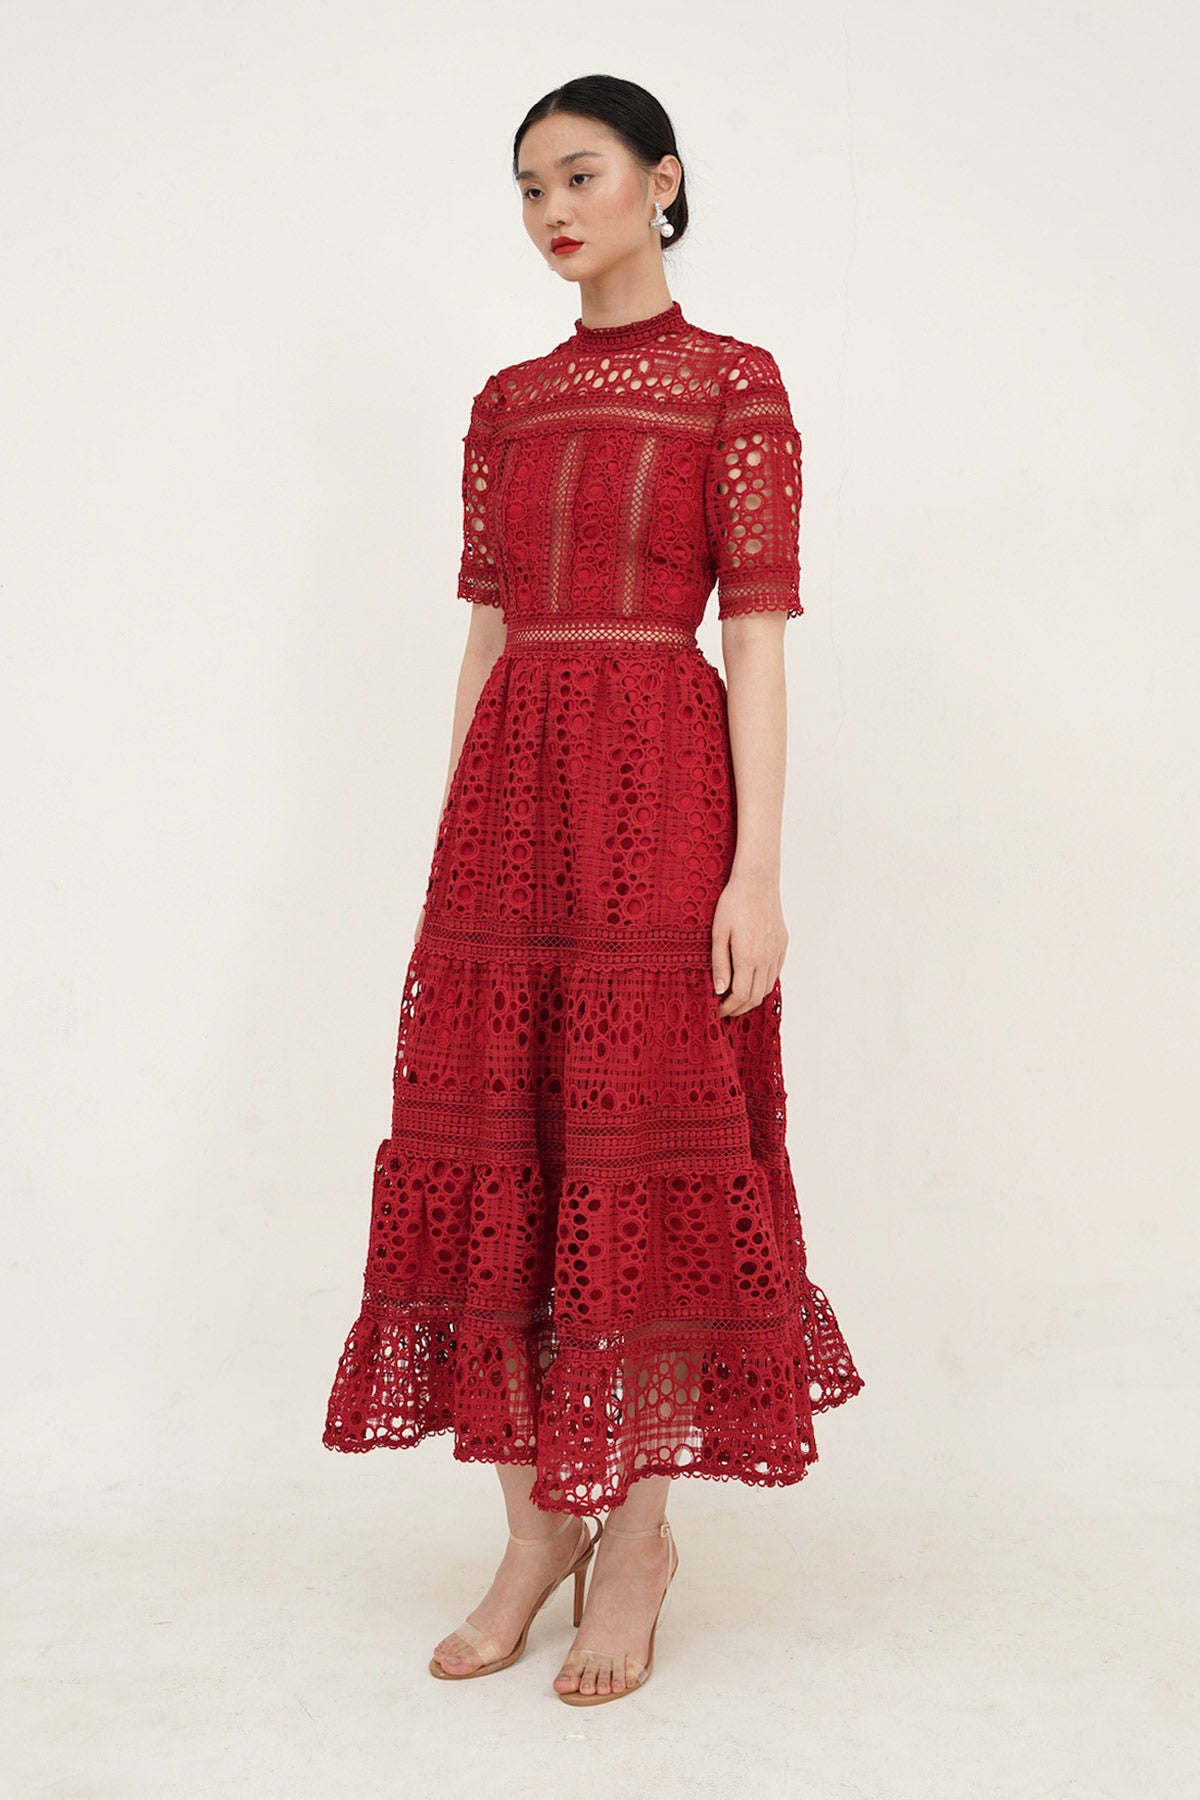 Guilin Dress In Red (2 Left)